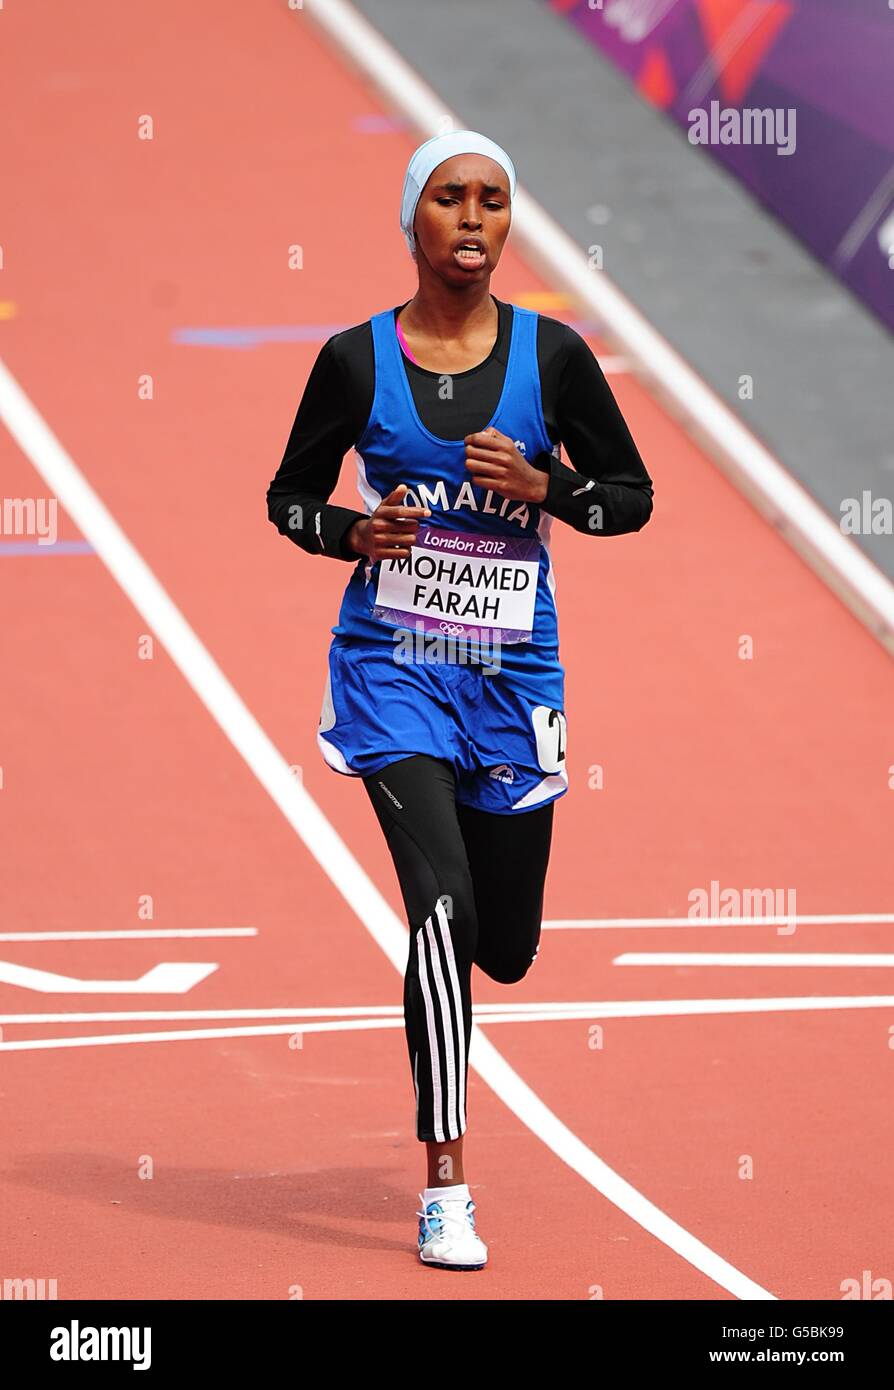 London Olympic Games - Day 7. Soamlia';s Mohamed Farah during round 1 of the Women's 400m Stock Photo